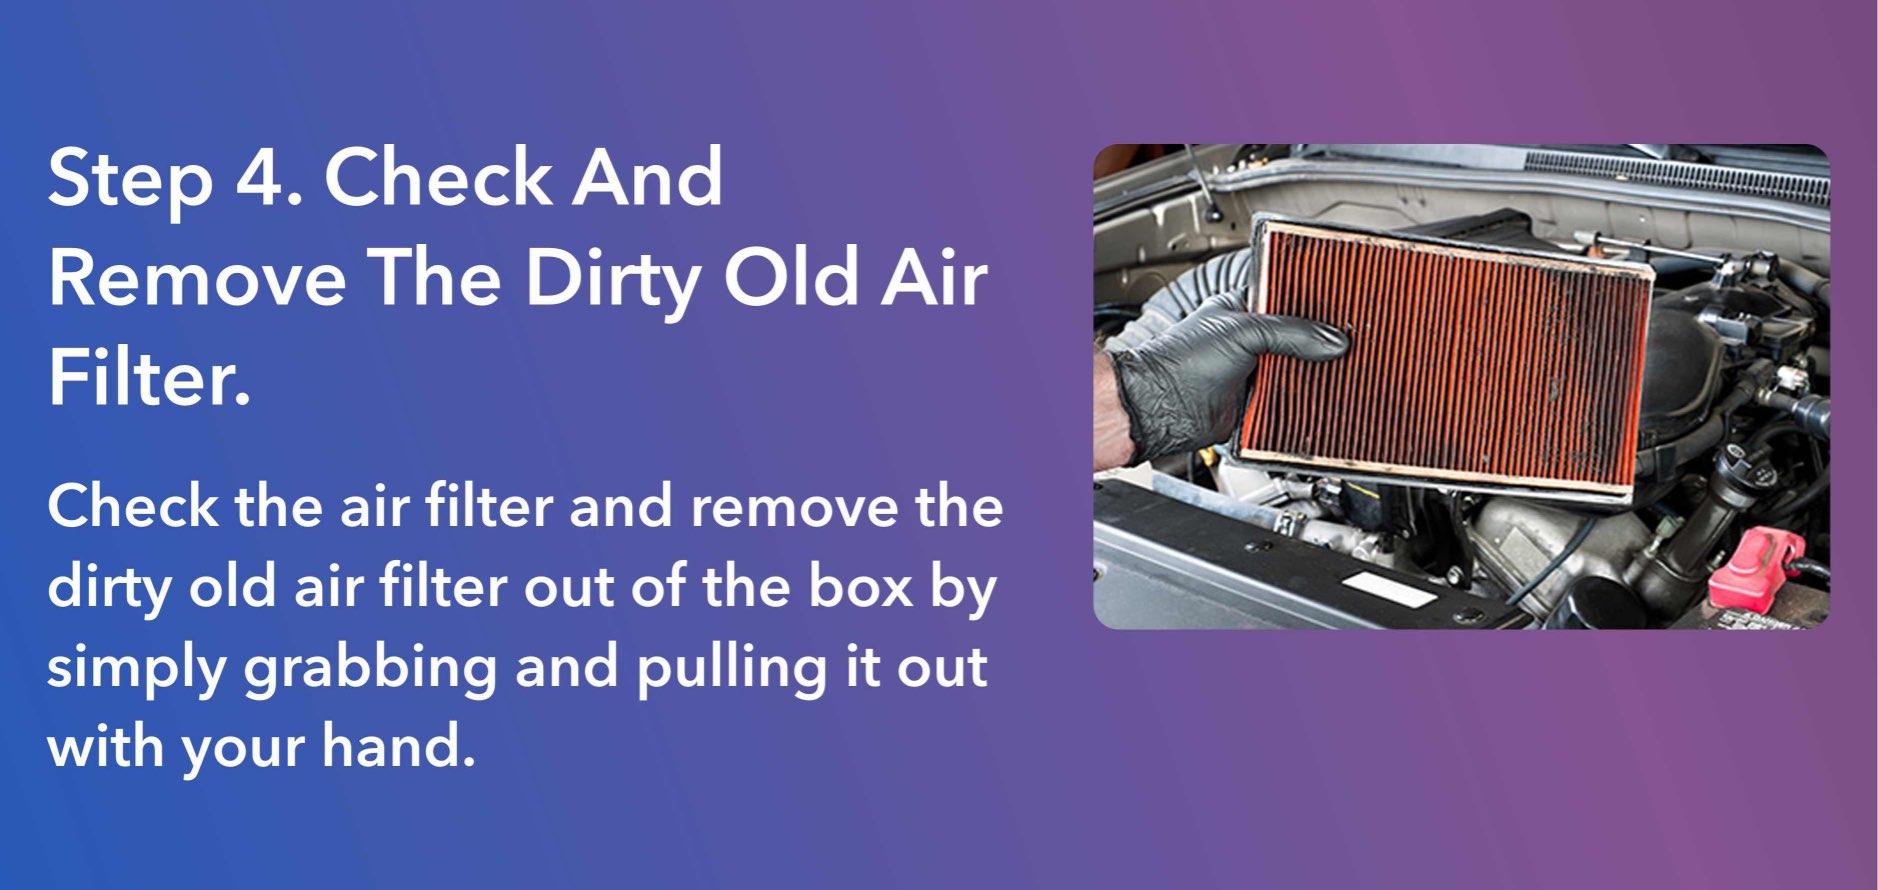 Check the air filter and remove the dirty old air filter out of the box by simply grabbing and pulling it out with your hand.